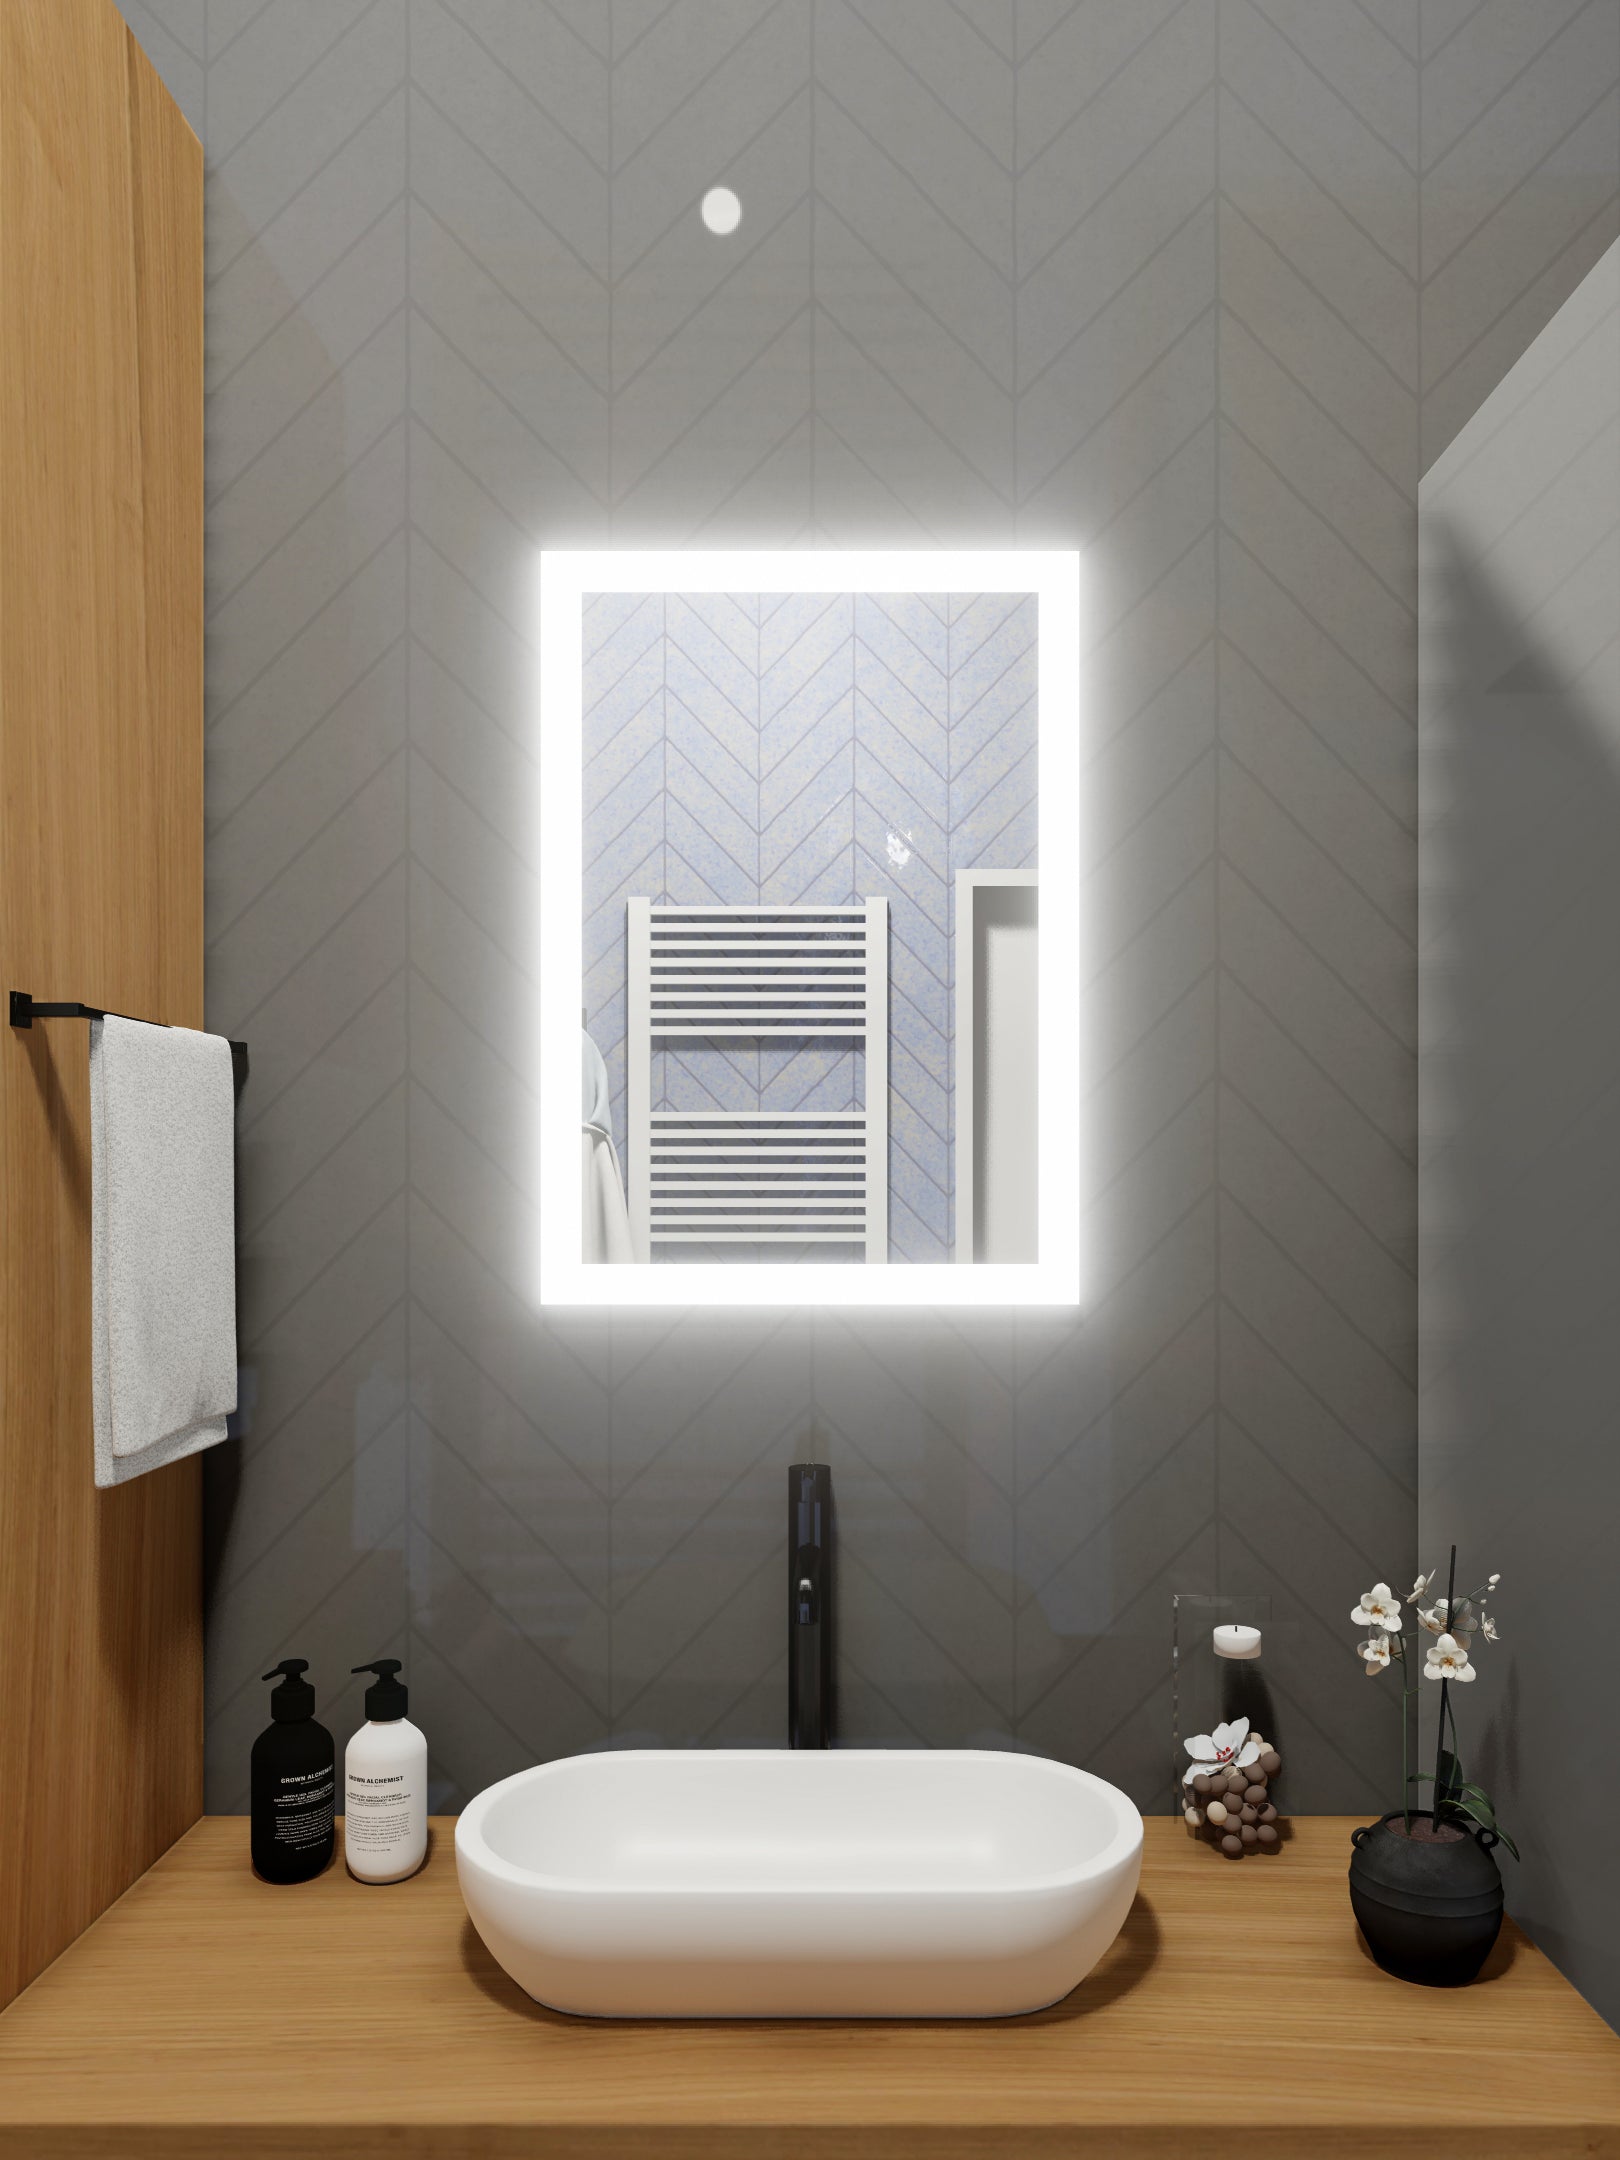 LED Mirror (Side-Lighted) 24" x 36" (or 36" x 24")